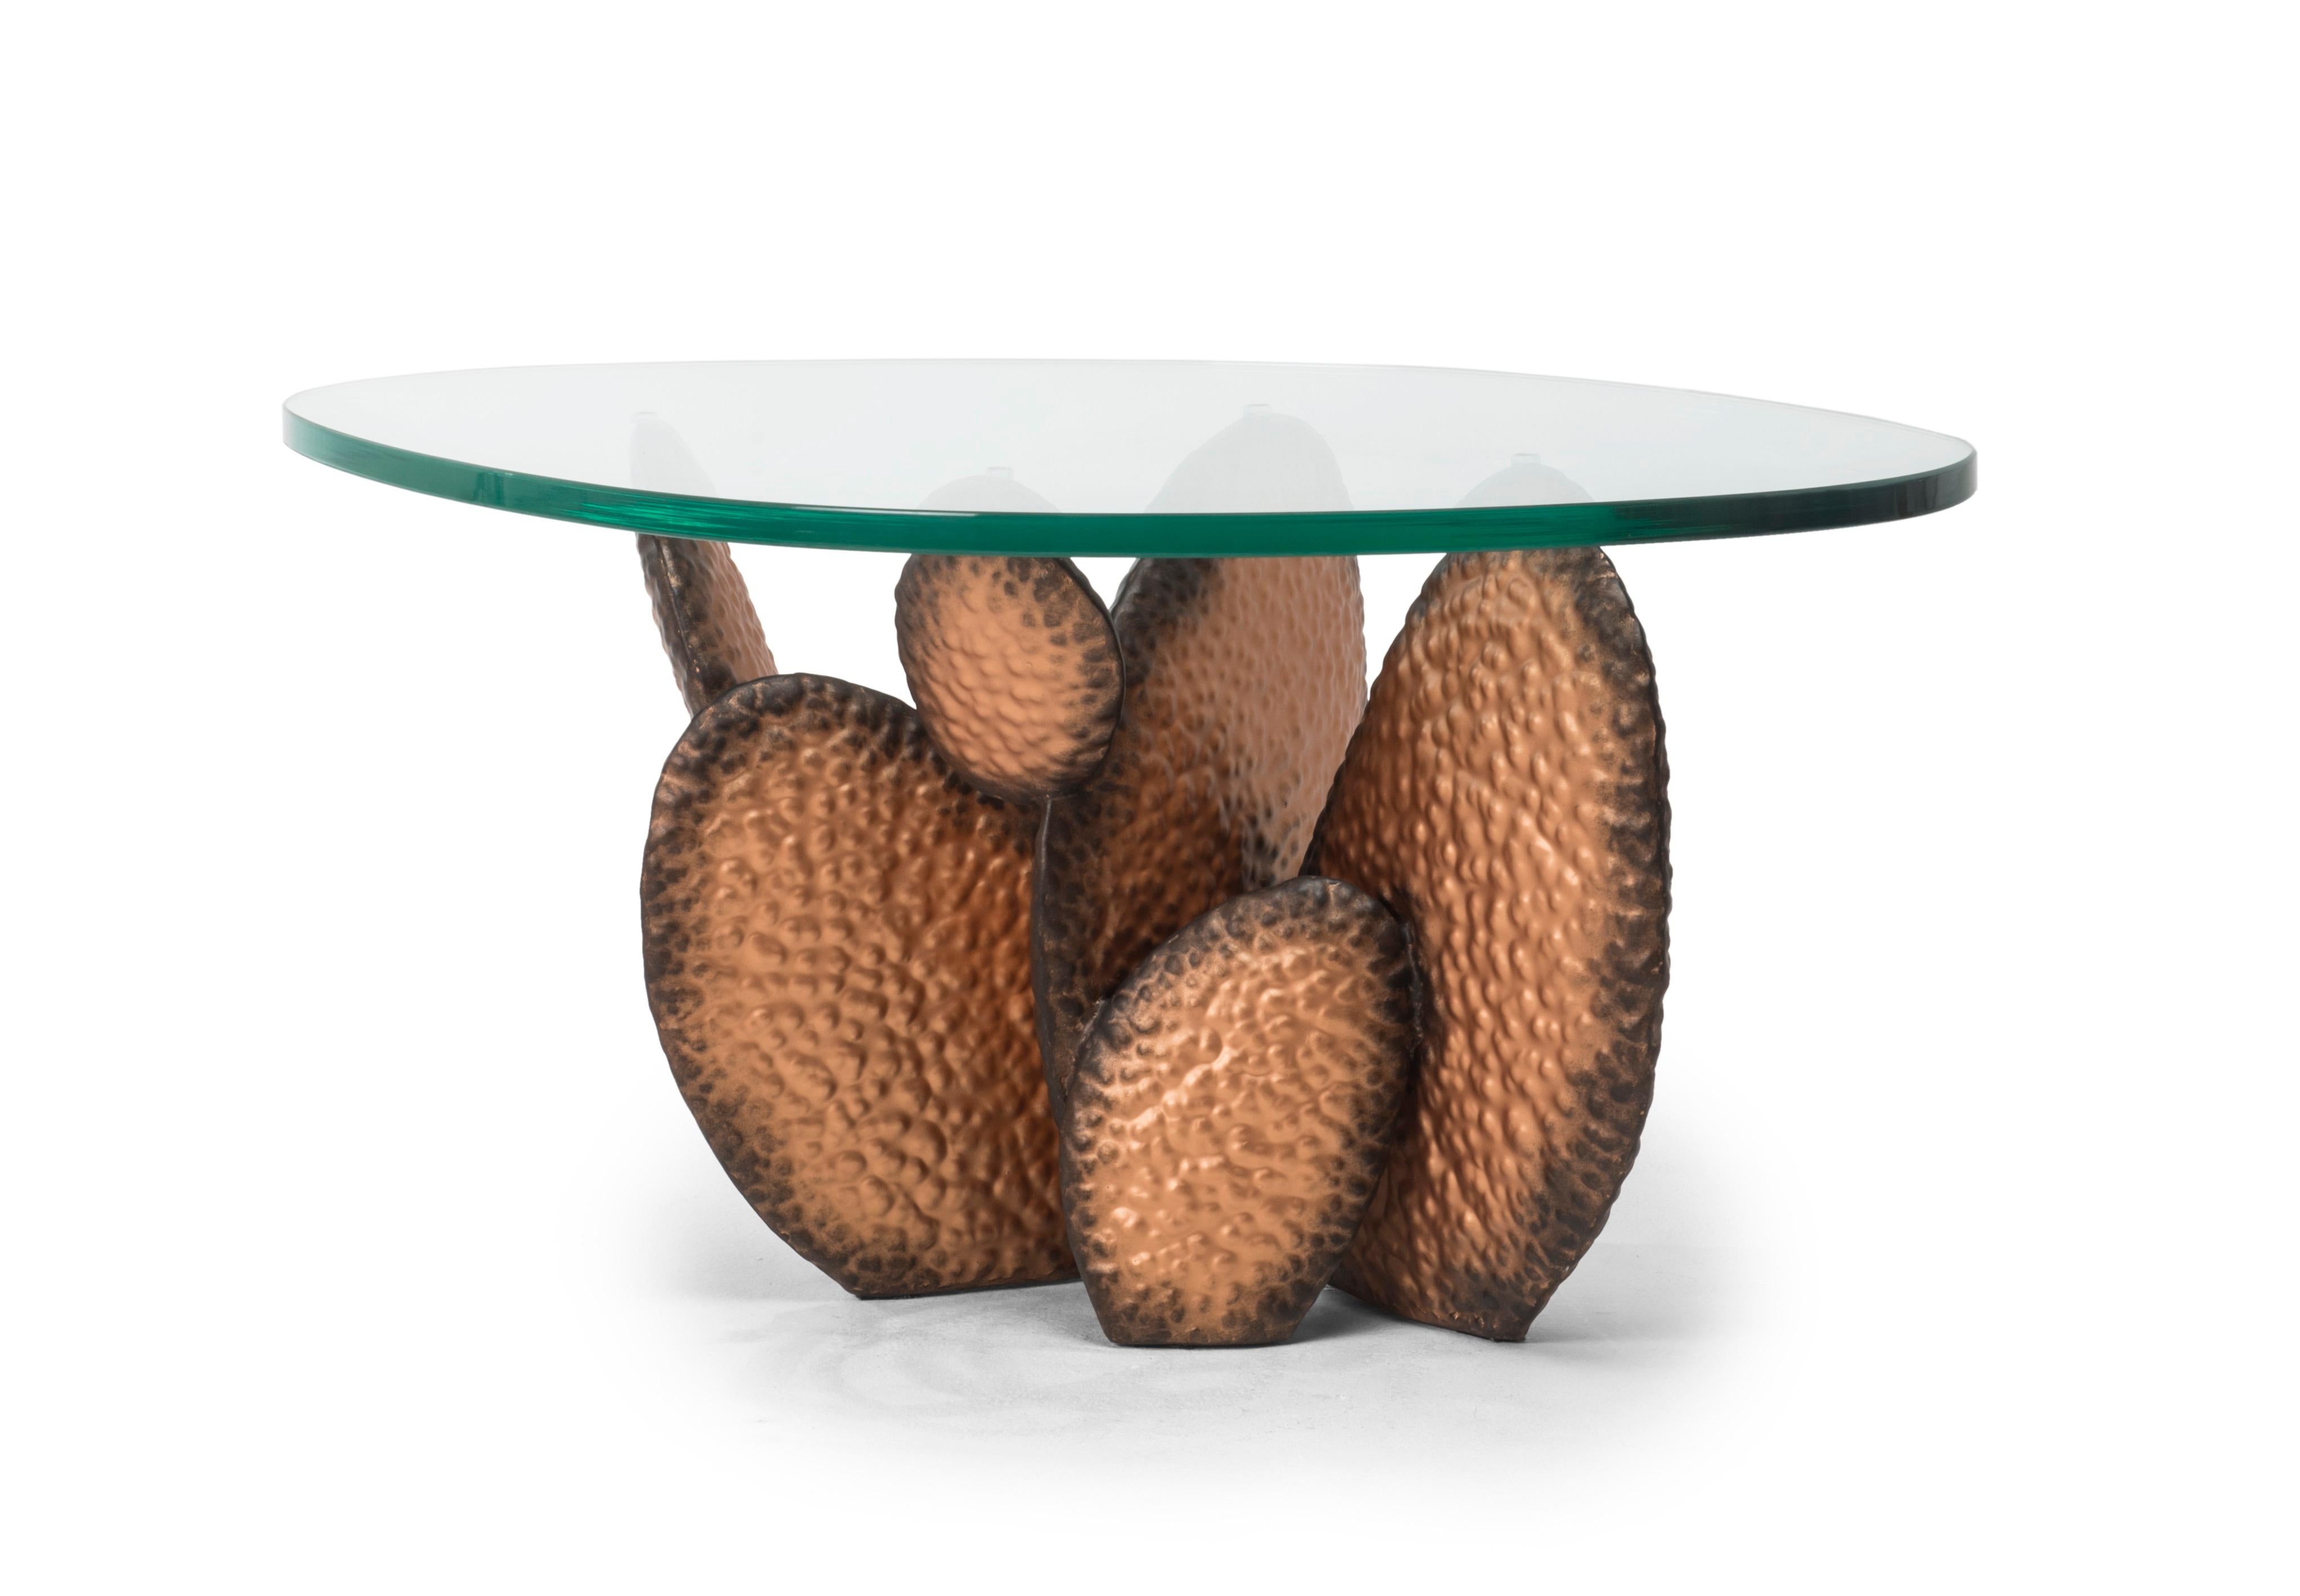 Low Gobi coffee table by Kenneth Cobonpue
Materials: Steel. Glass. 
Also available in other sizes.
Dimensions: 
Glass 85 cm x 59 cm x H 19mm 
Base 41.5 cm x 60 cm x H 39.5 cm

Inspired by the characteristic form of the cactus, Gobi is a